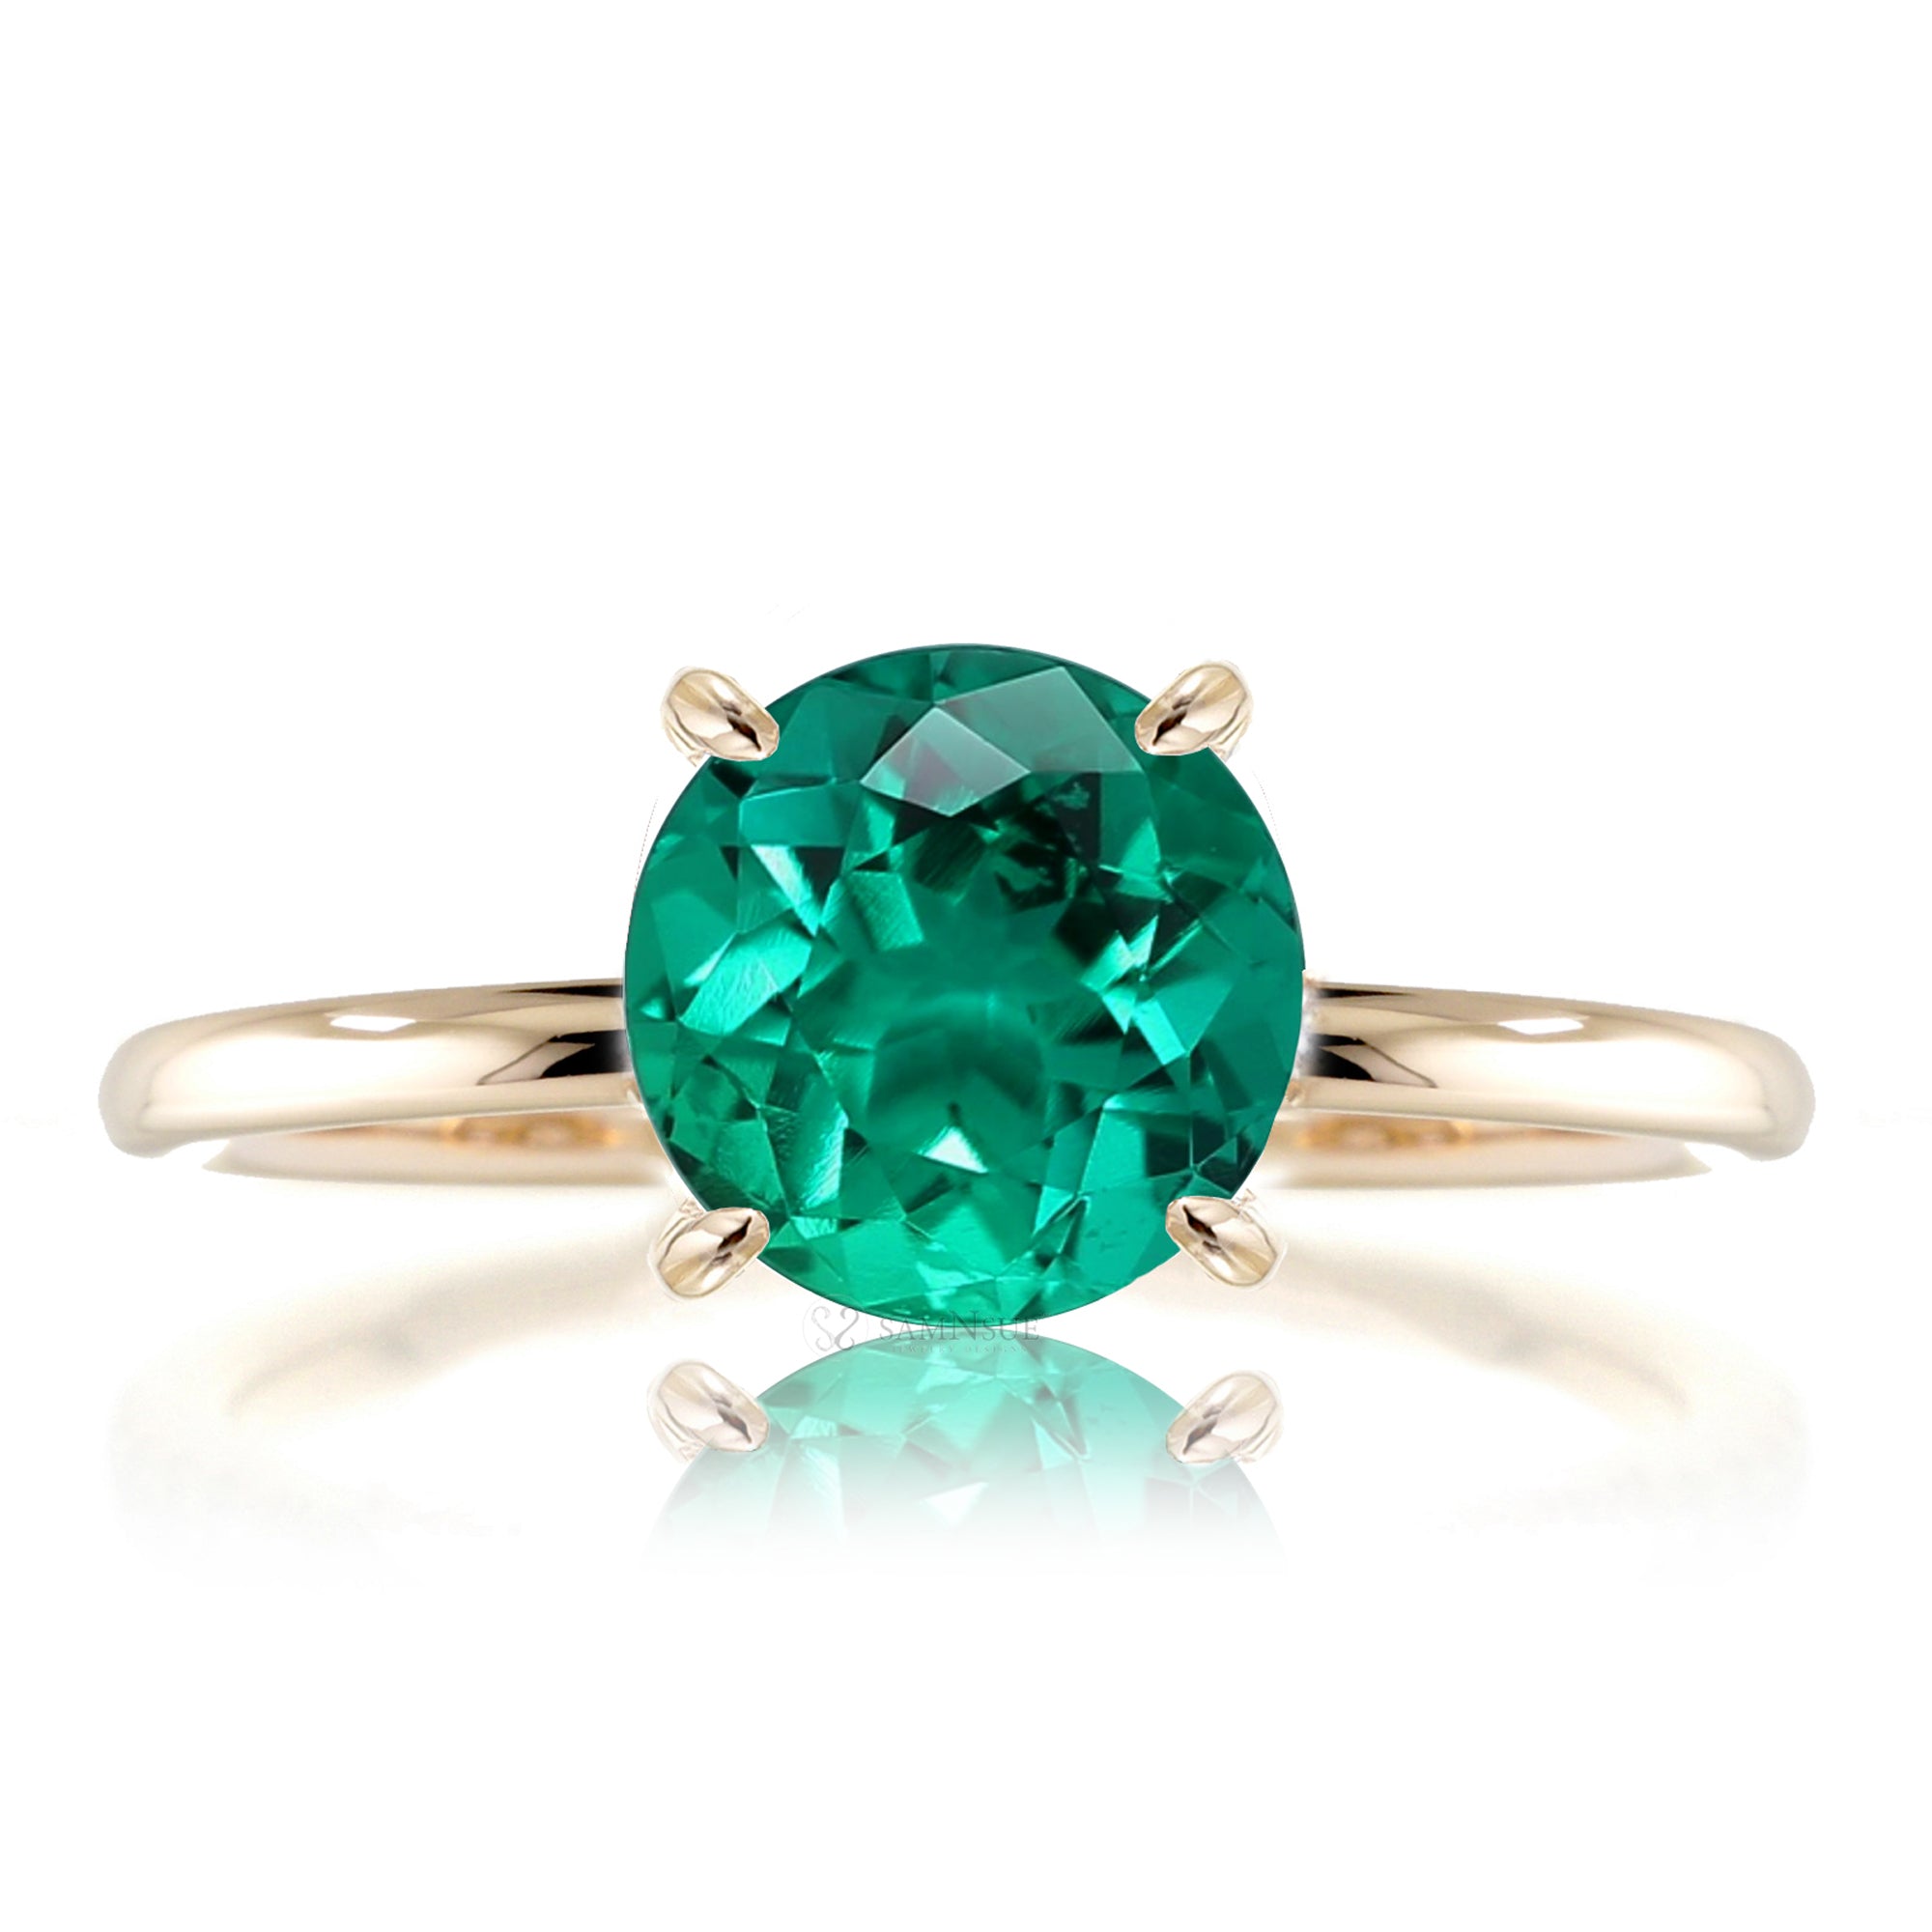 The Ava Round Green Emerald (Lab Grown)